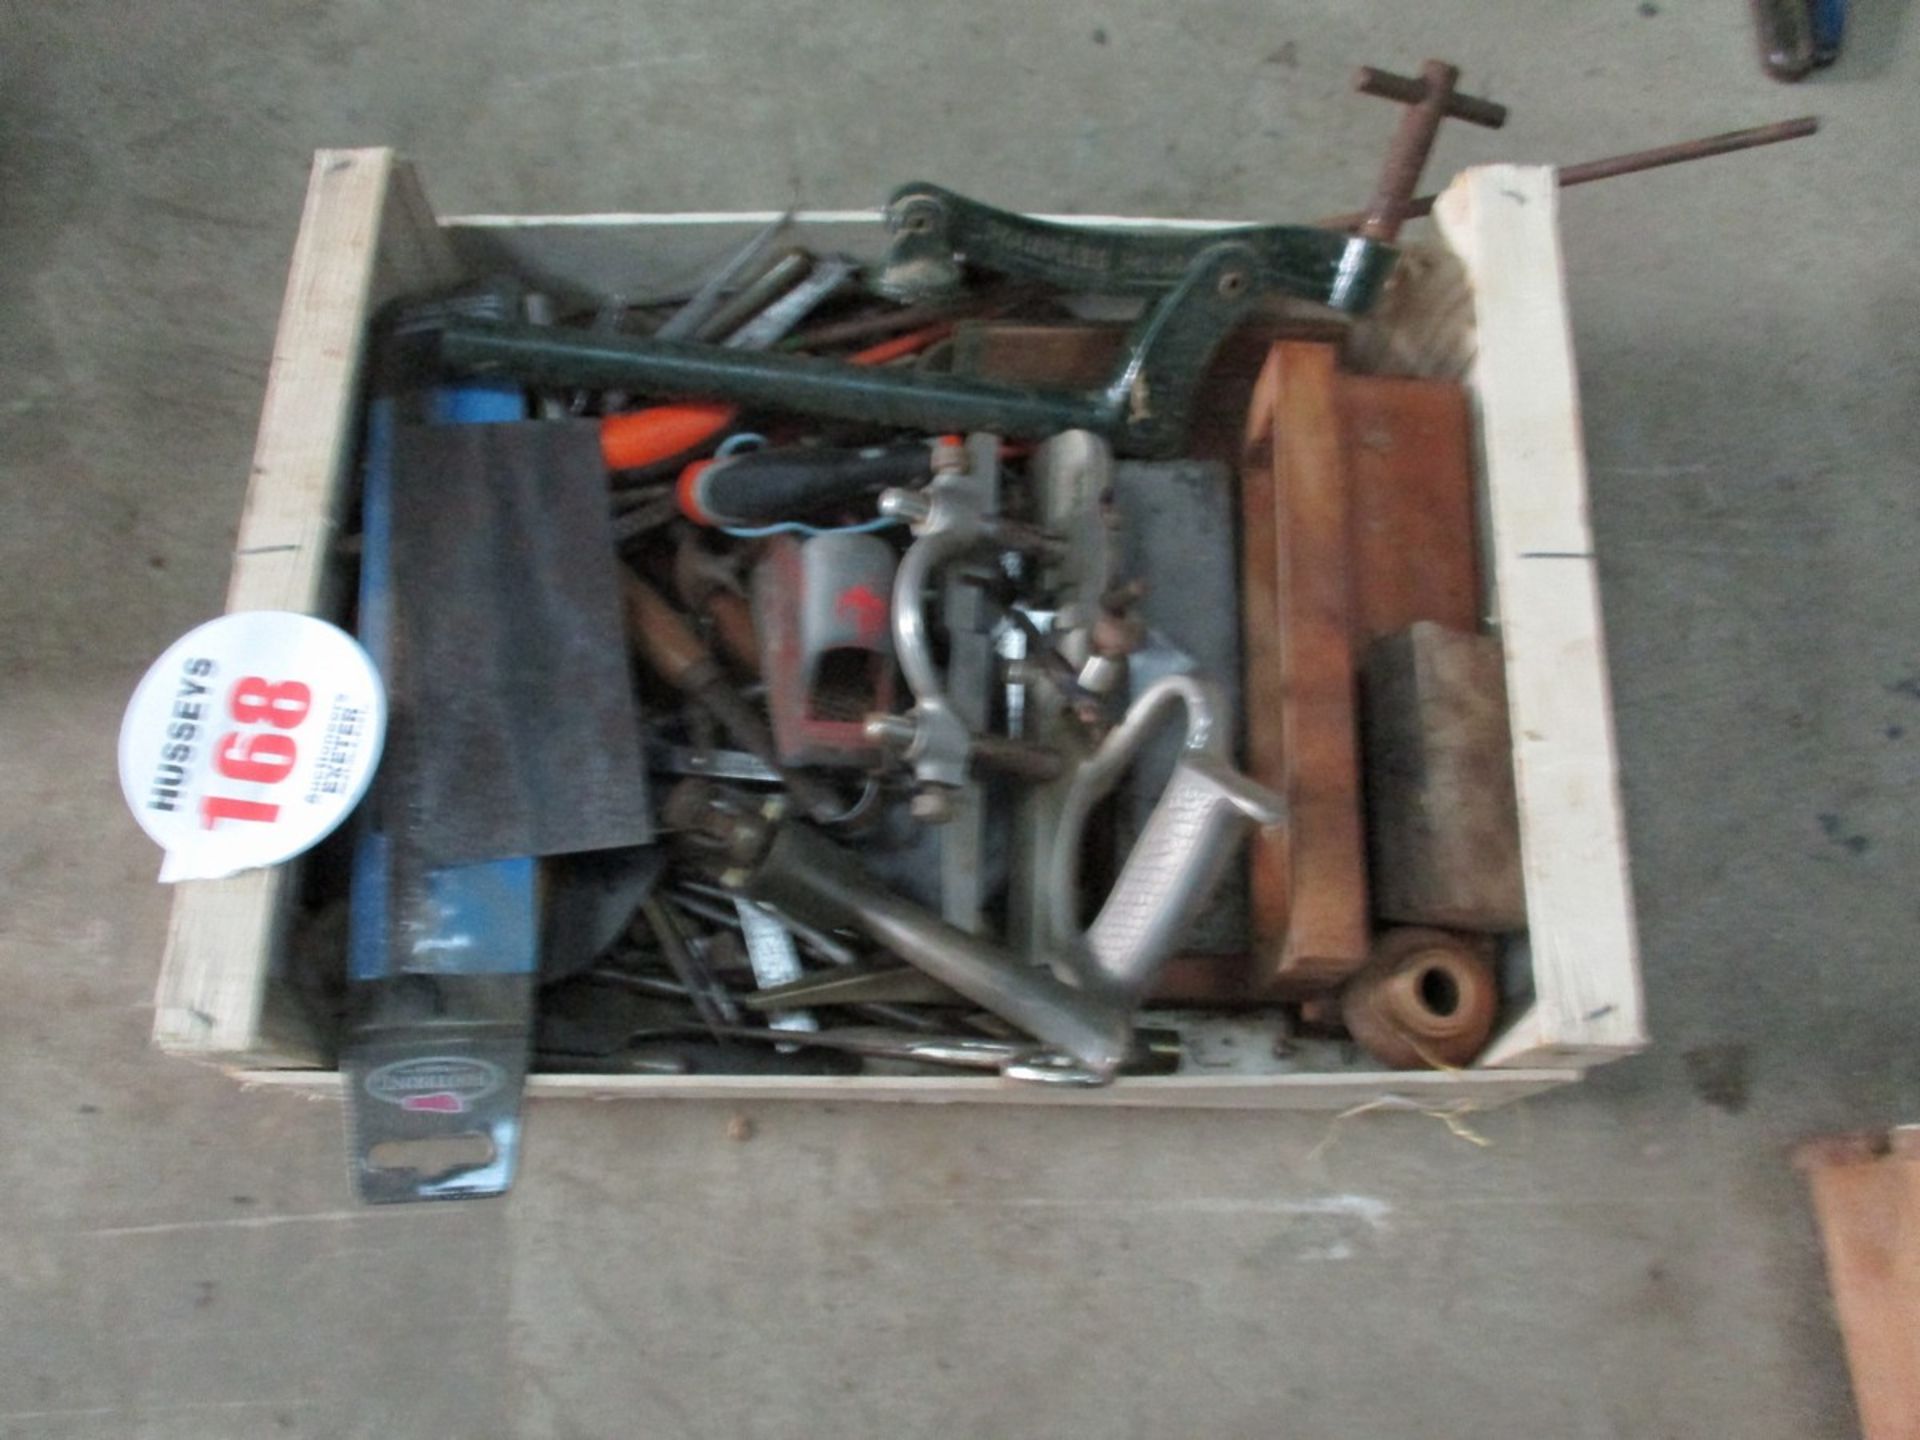 BOX OF WOOD WORKING TOOLS